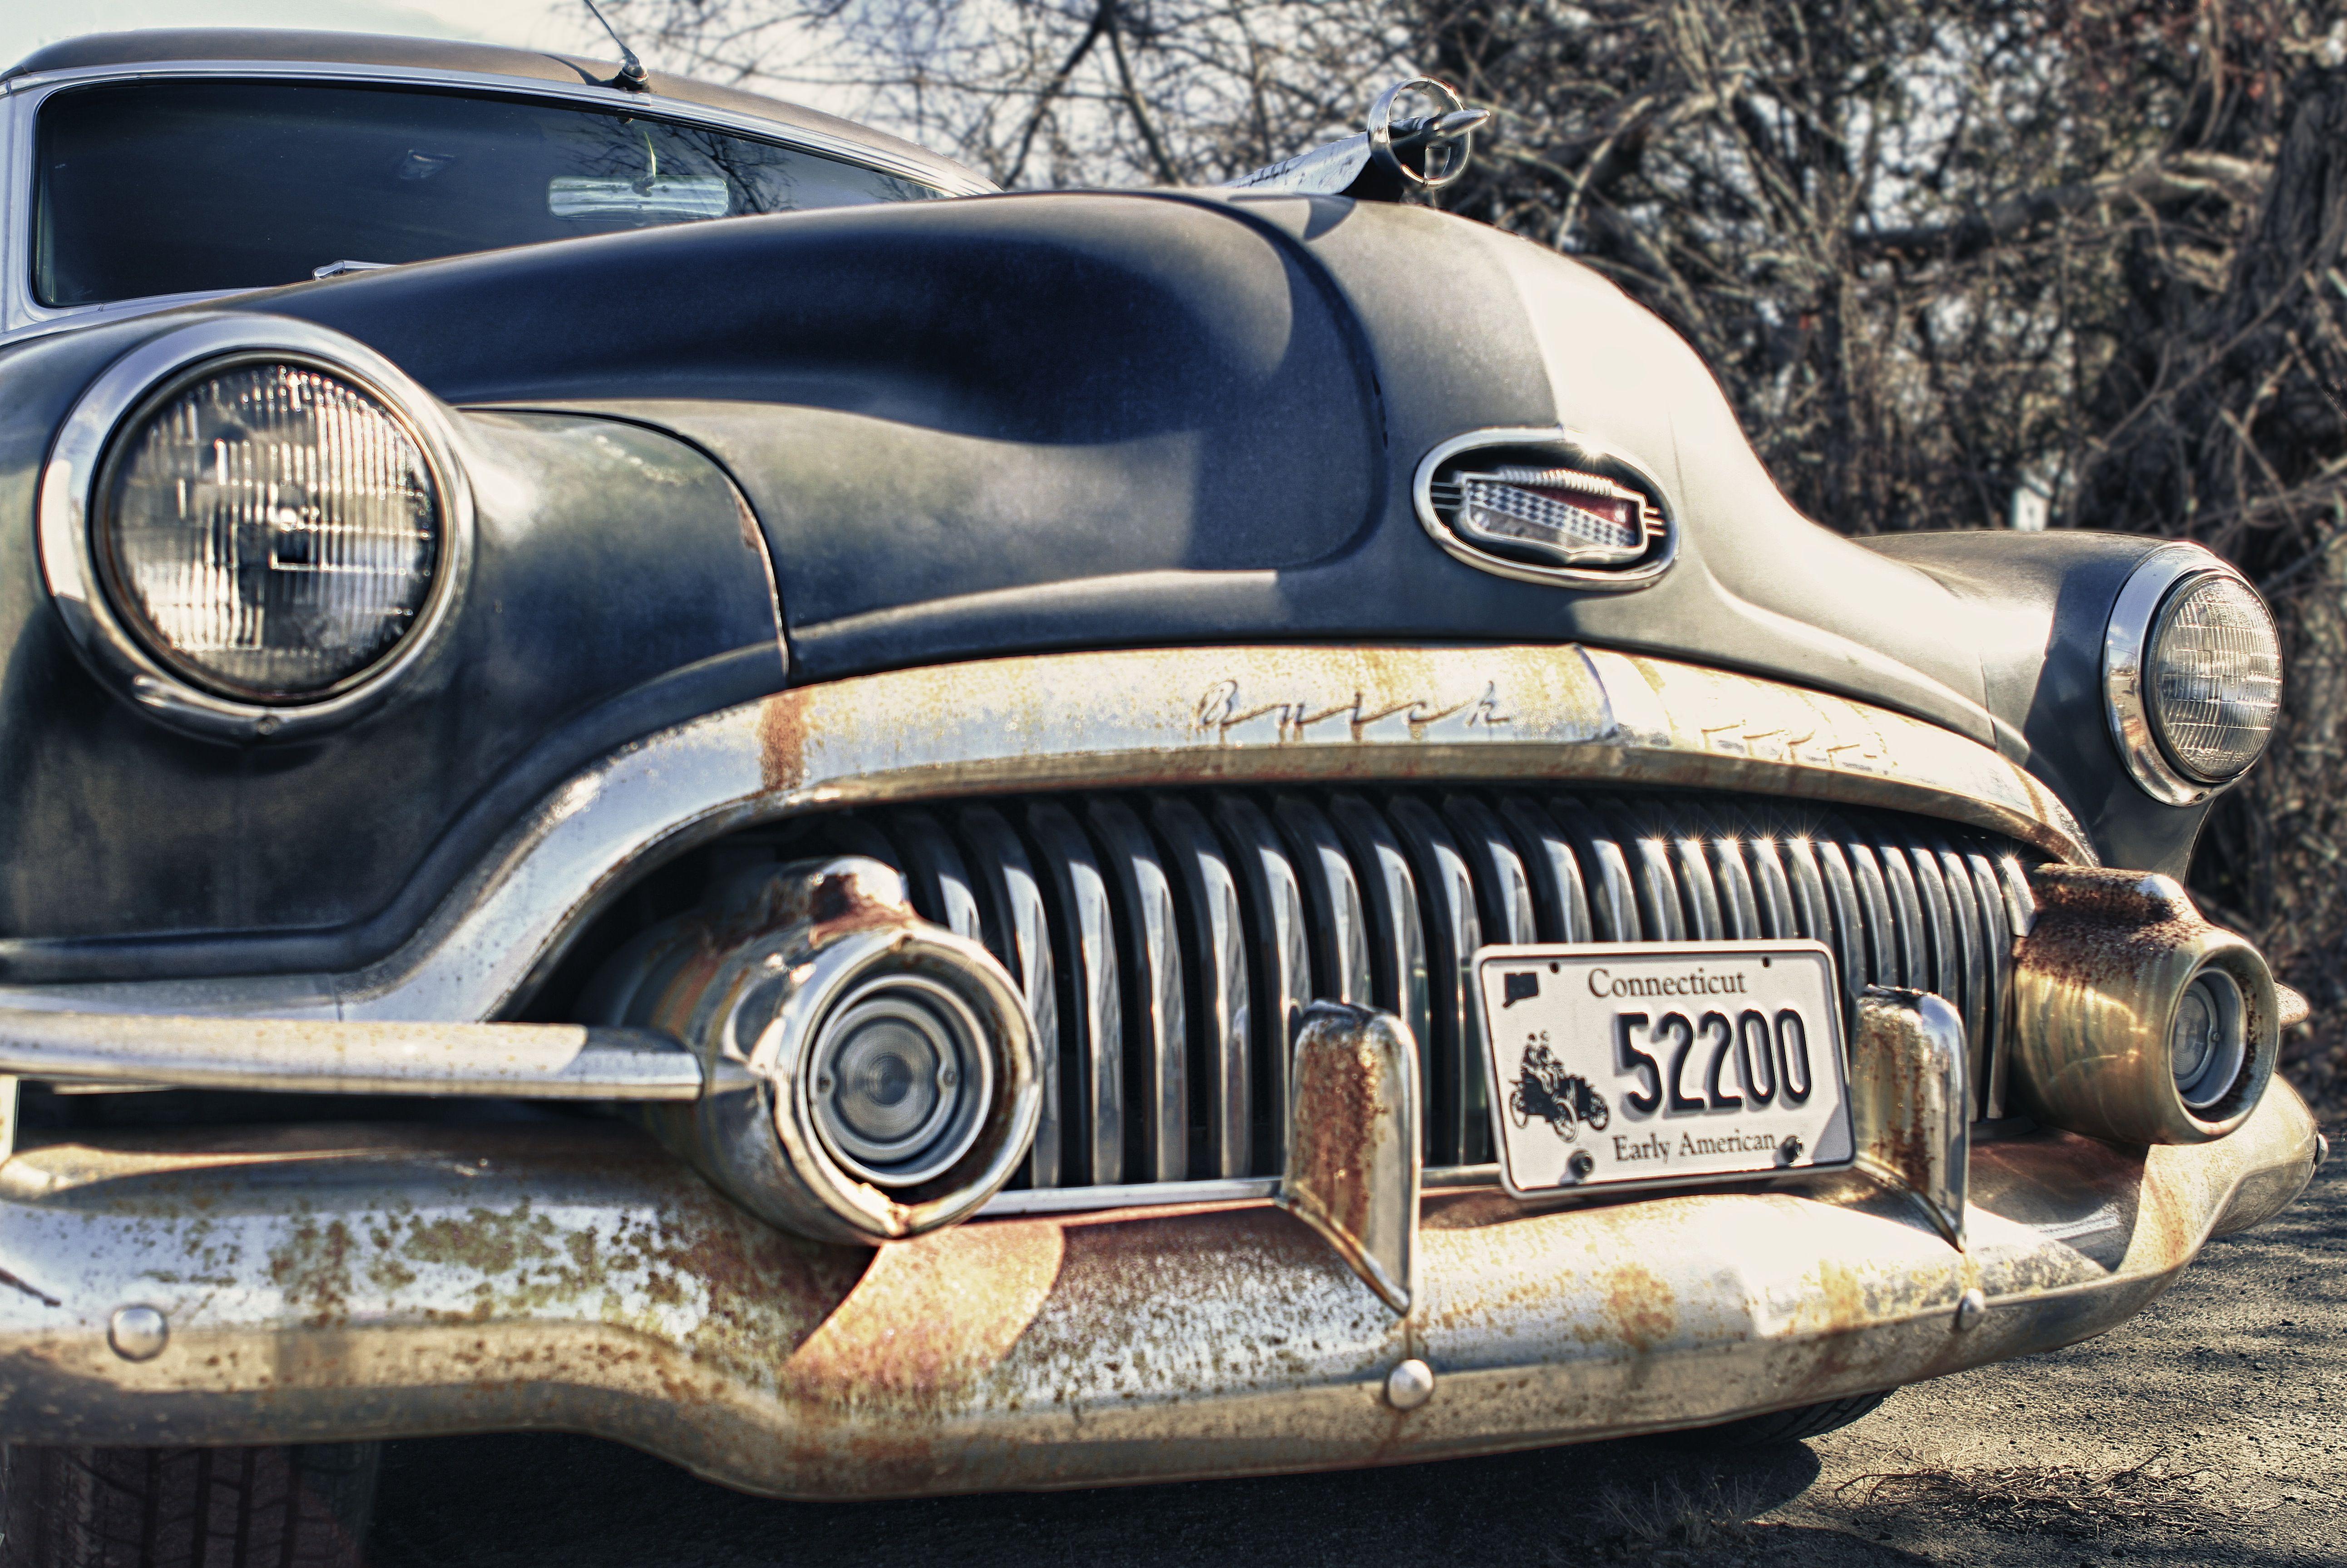 Antique Buick Logo - Vintage Buick | Snapshots For Sore Eyes